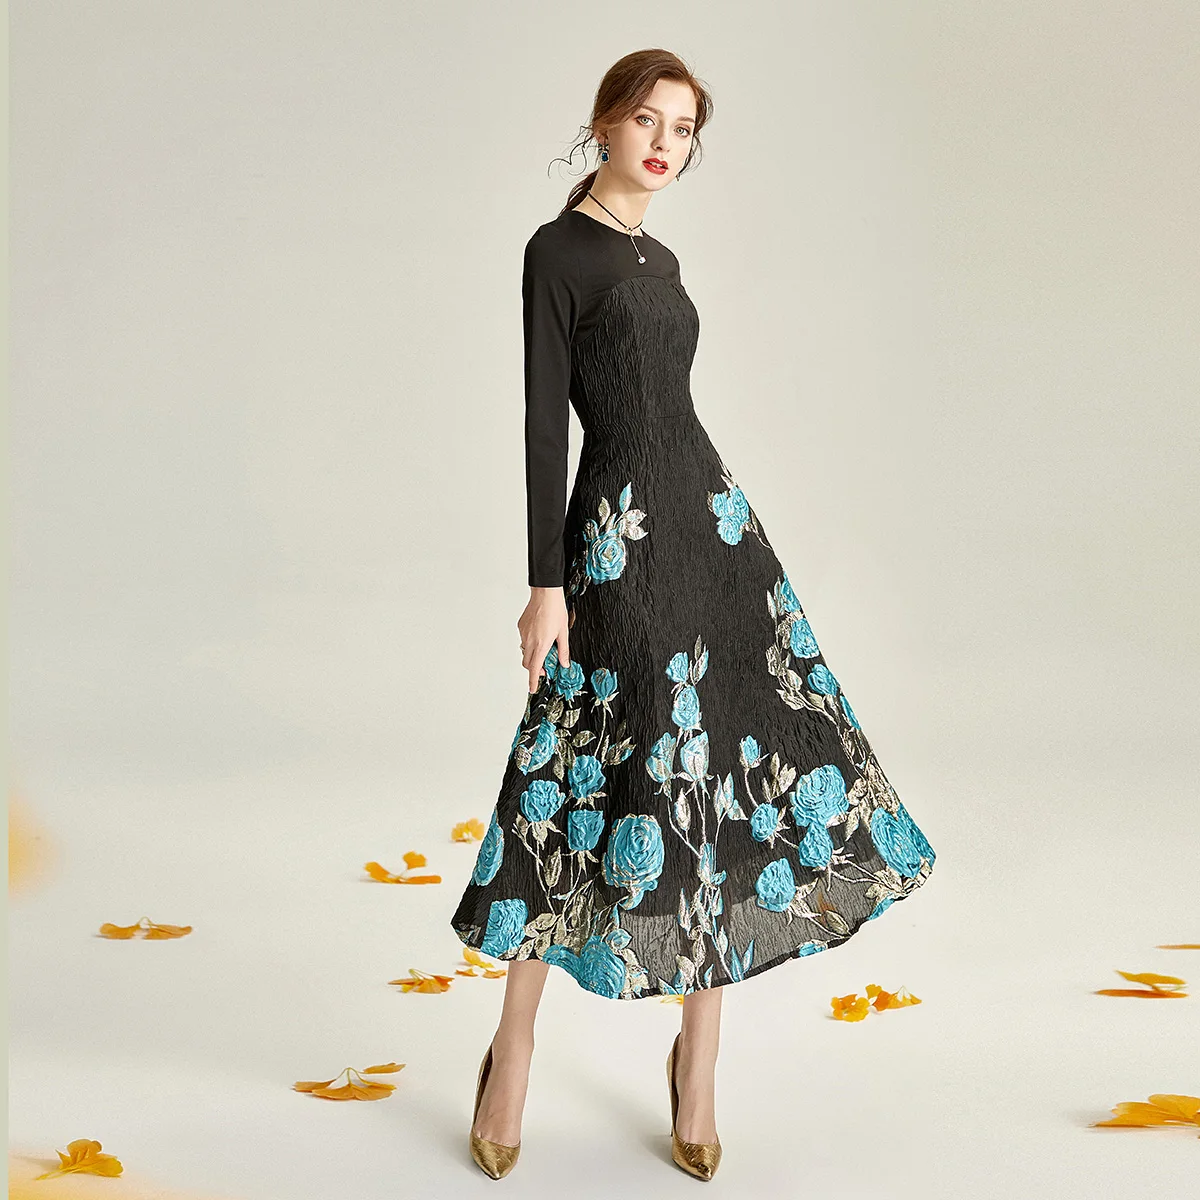 2021 Spring England Style Jacquard Dress Black Brocade Dress Women Long Sleeve Party Evening Clothing Mid-Calf Ball Gown